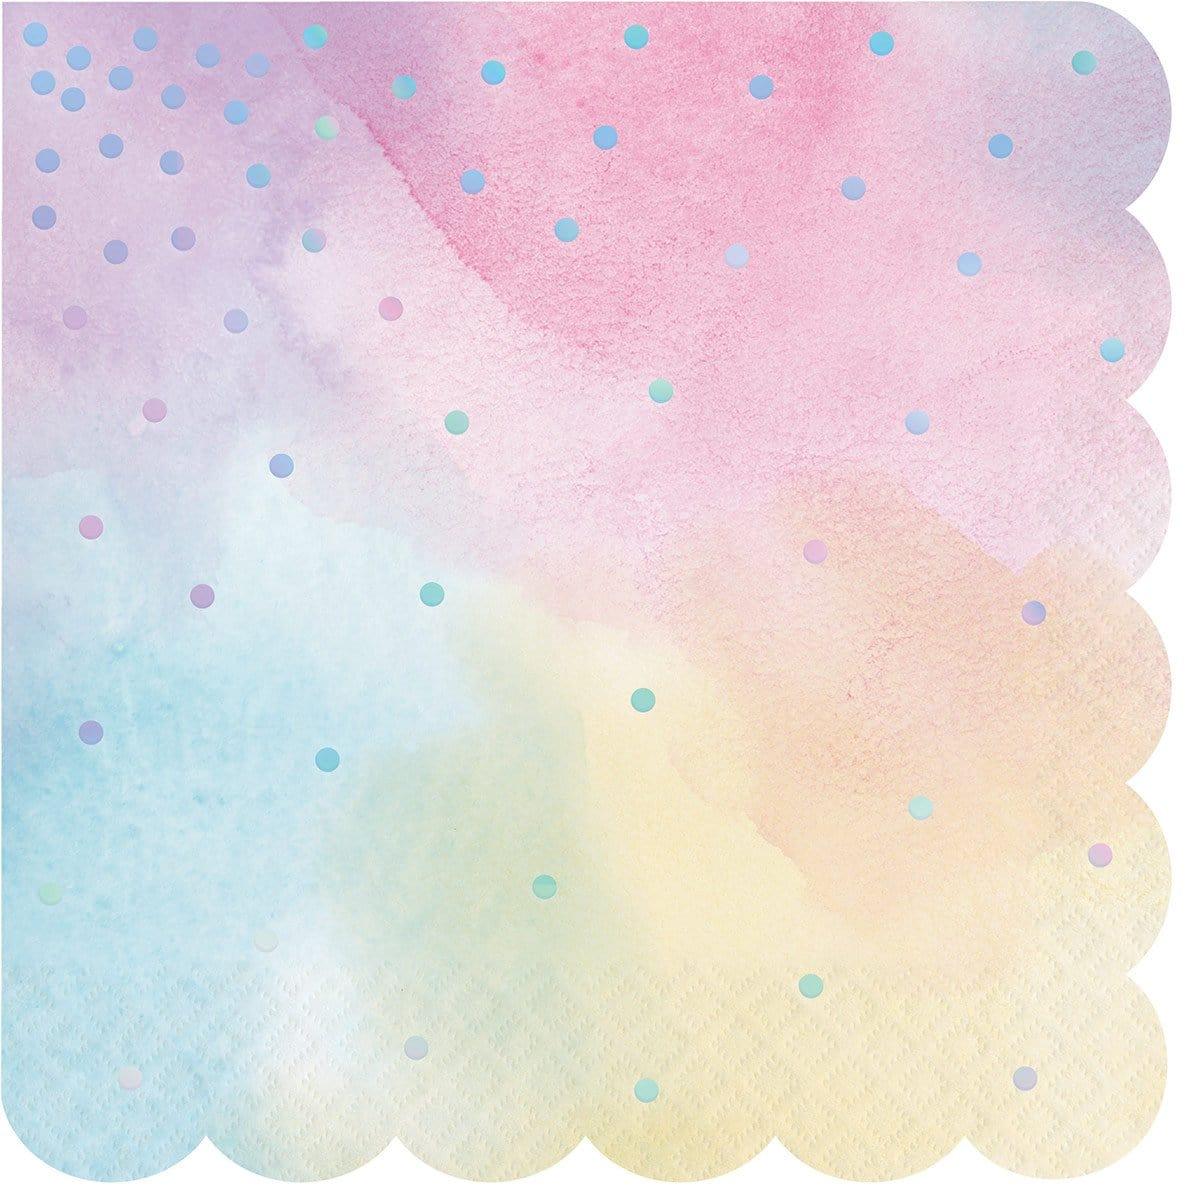 Buy Everyday Entertaining Iridescent Lunch Napkins, 16 per Package sold at Party Expert